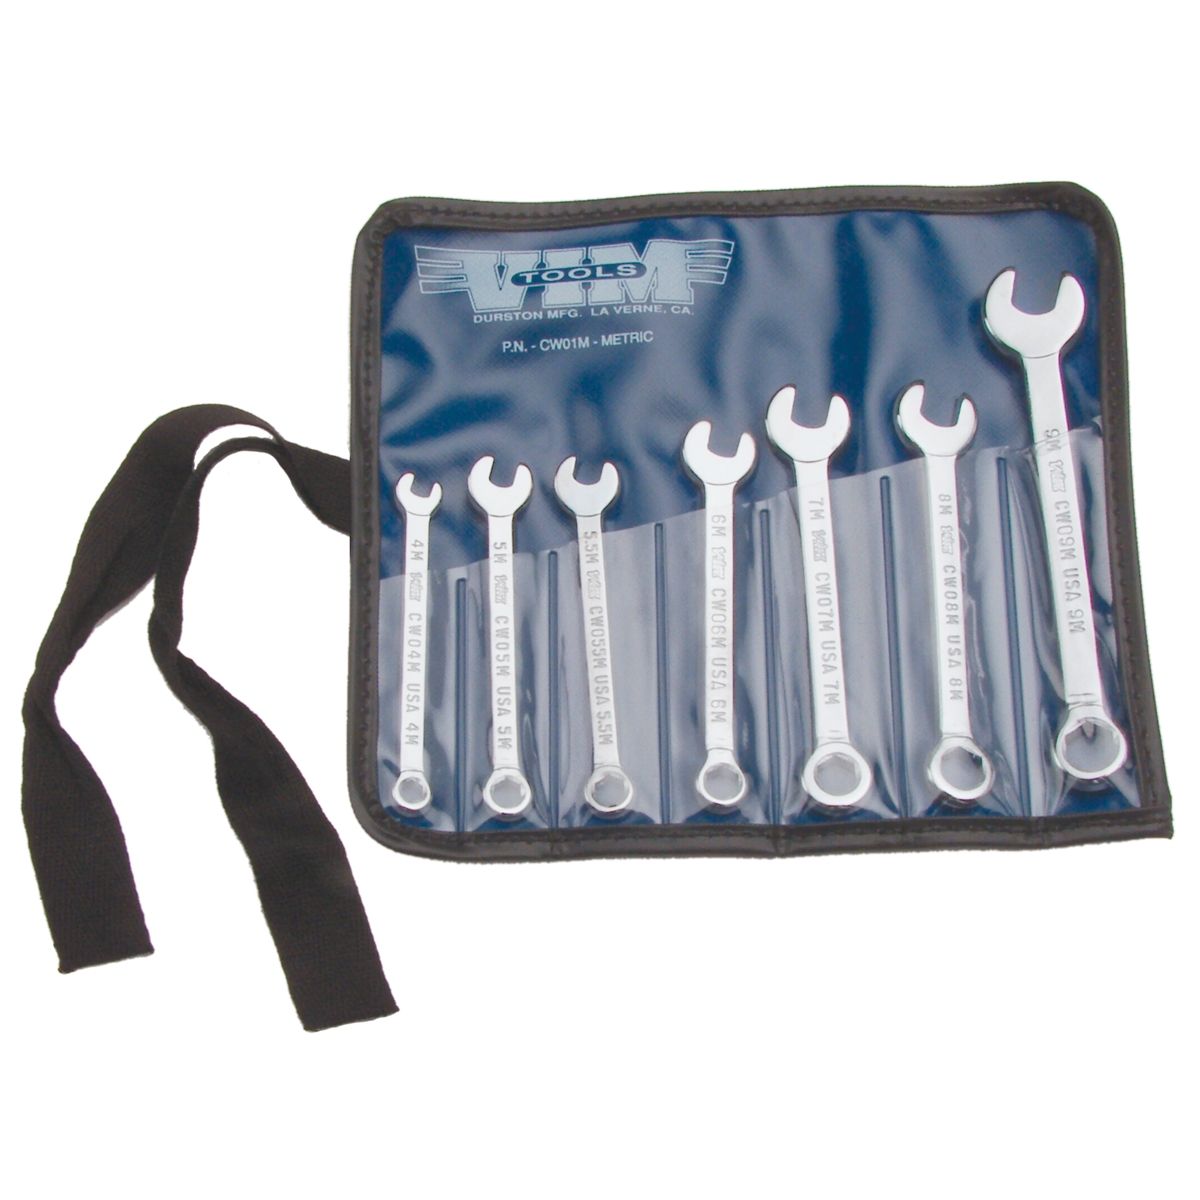 Combination Metric Wrench Set - 4mm to 9mm - 7-Pc